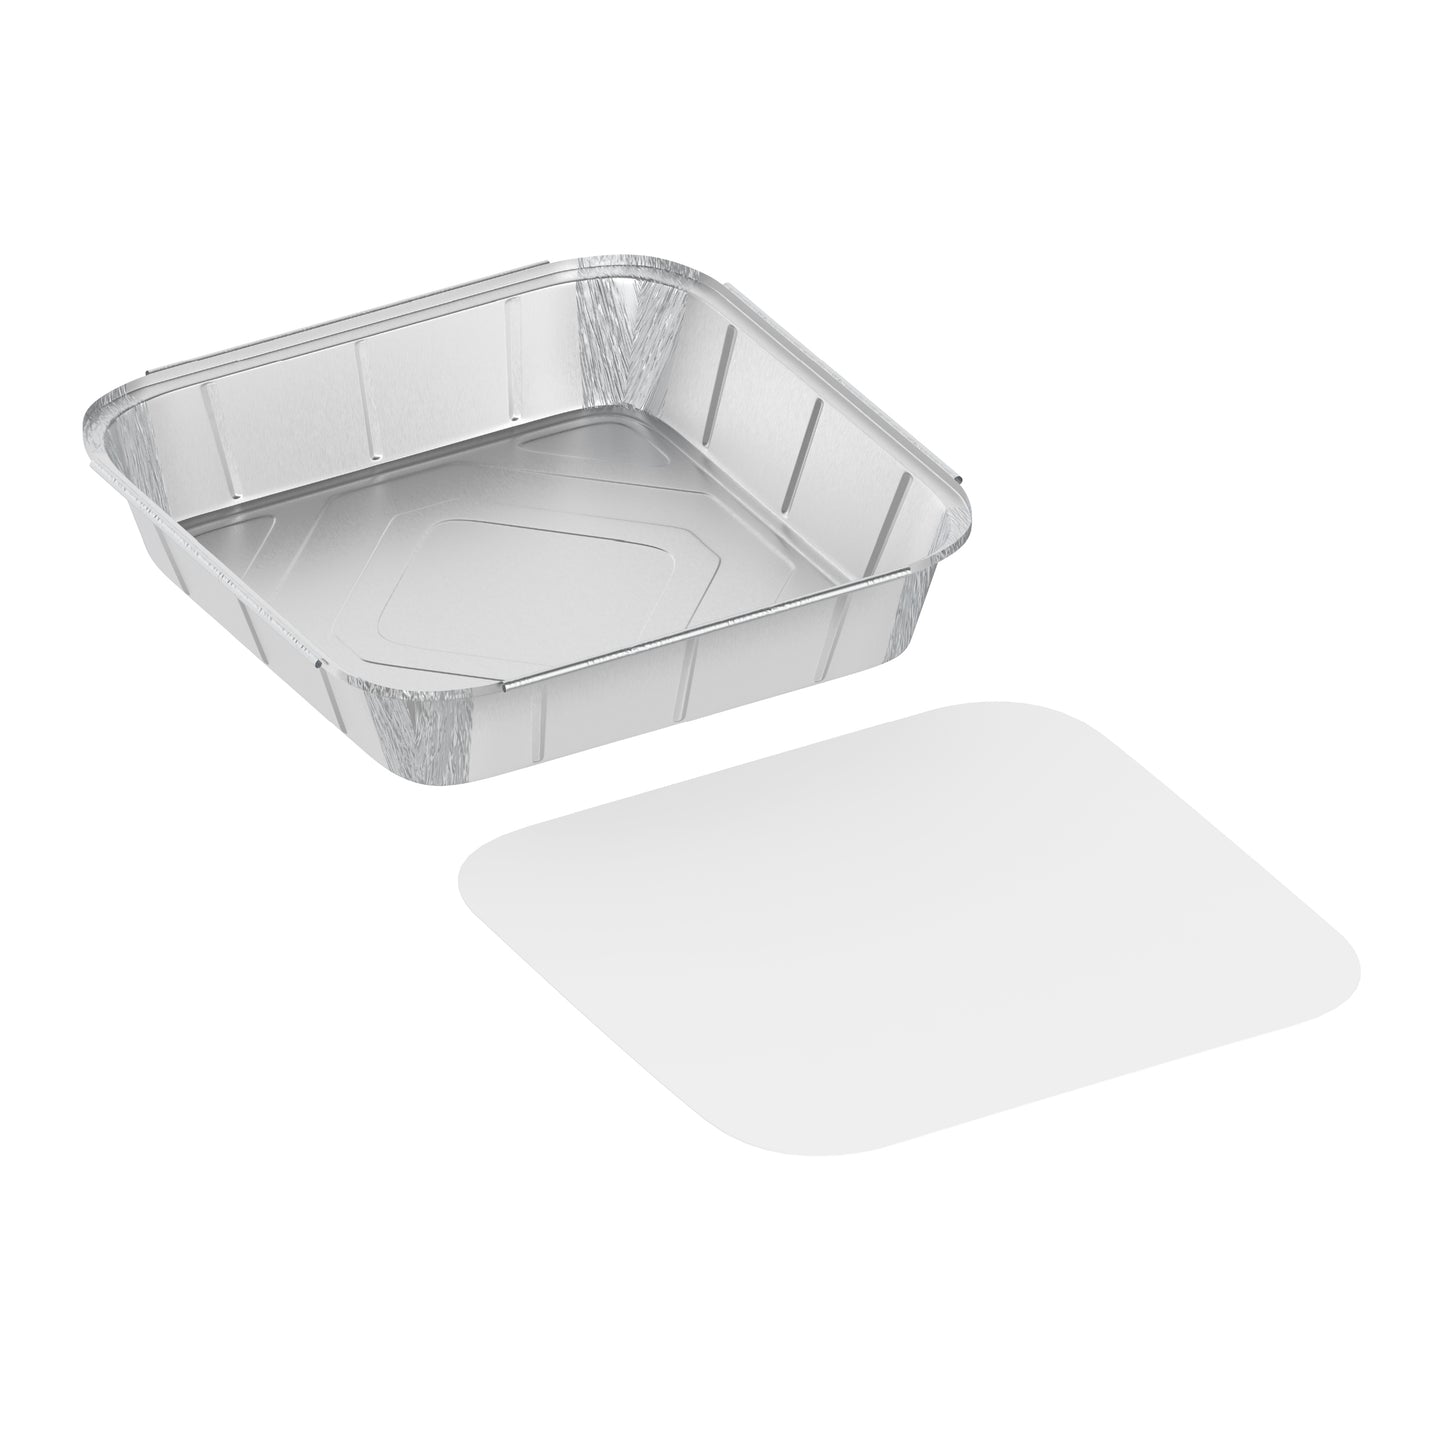 2410 cc Pack of 10 Aluminium Containers with Lids